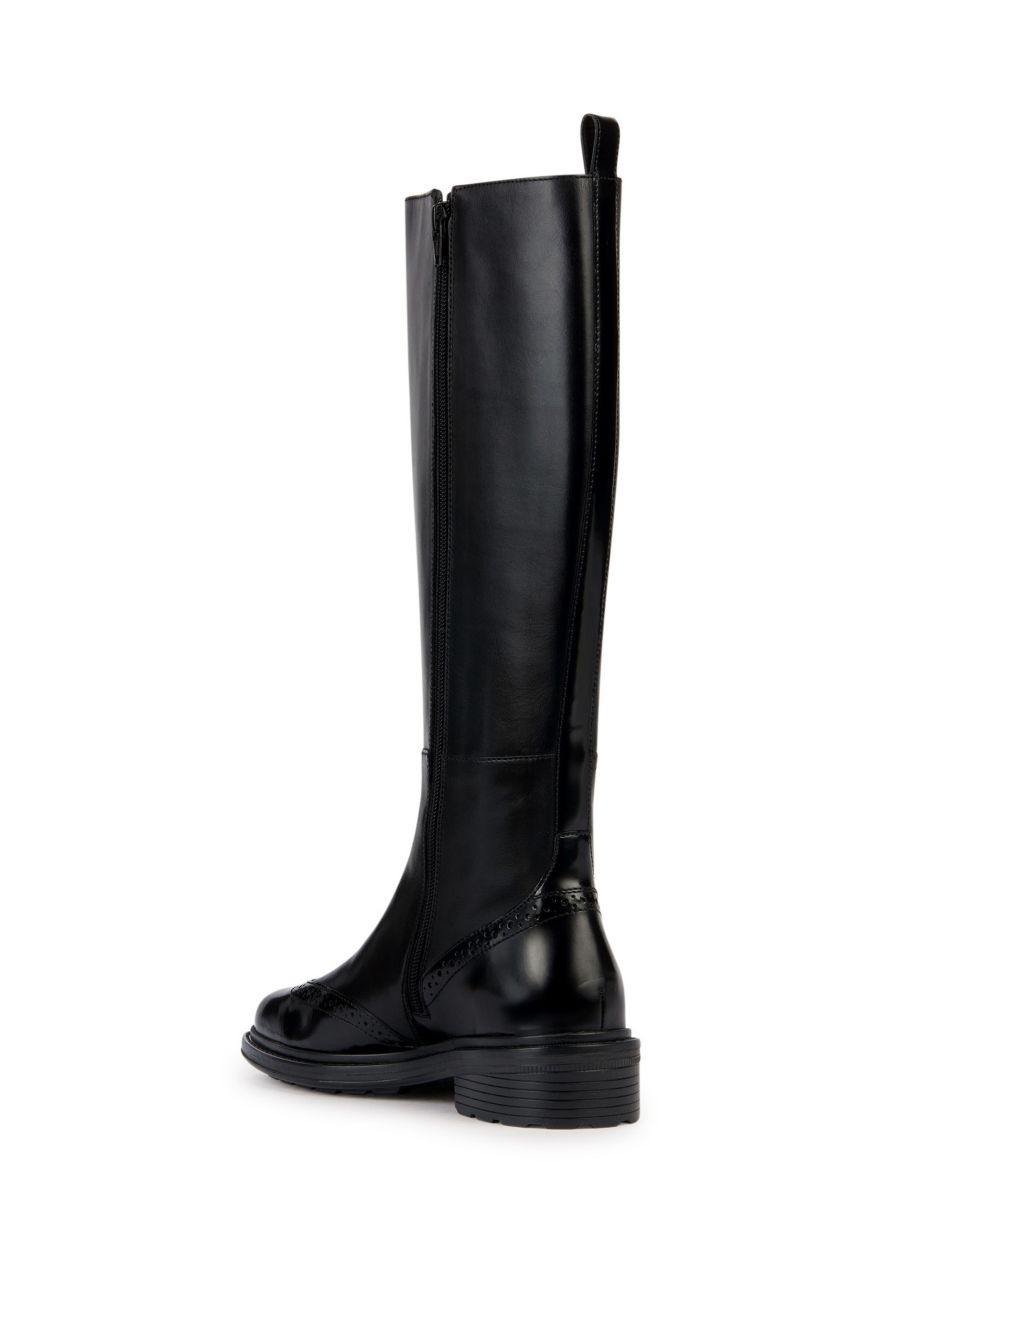 Leather Brogue Detail Knee High Boots | Geox | M&S